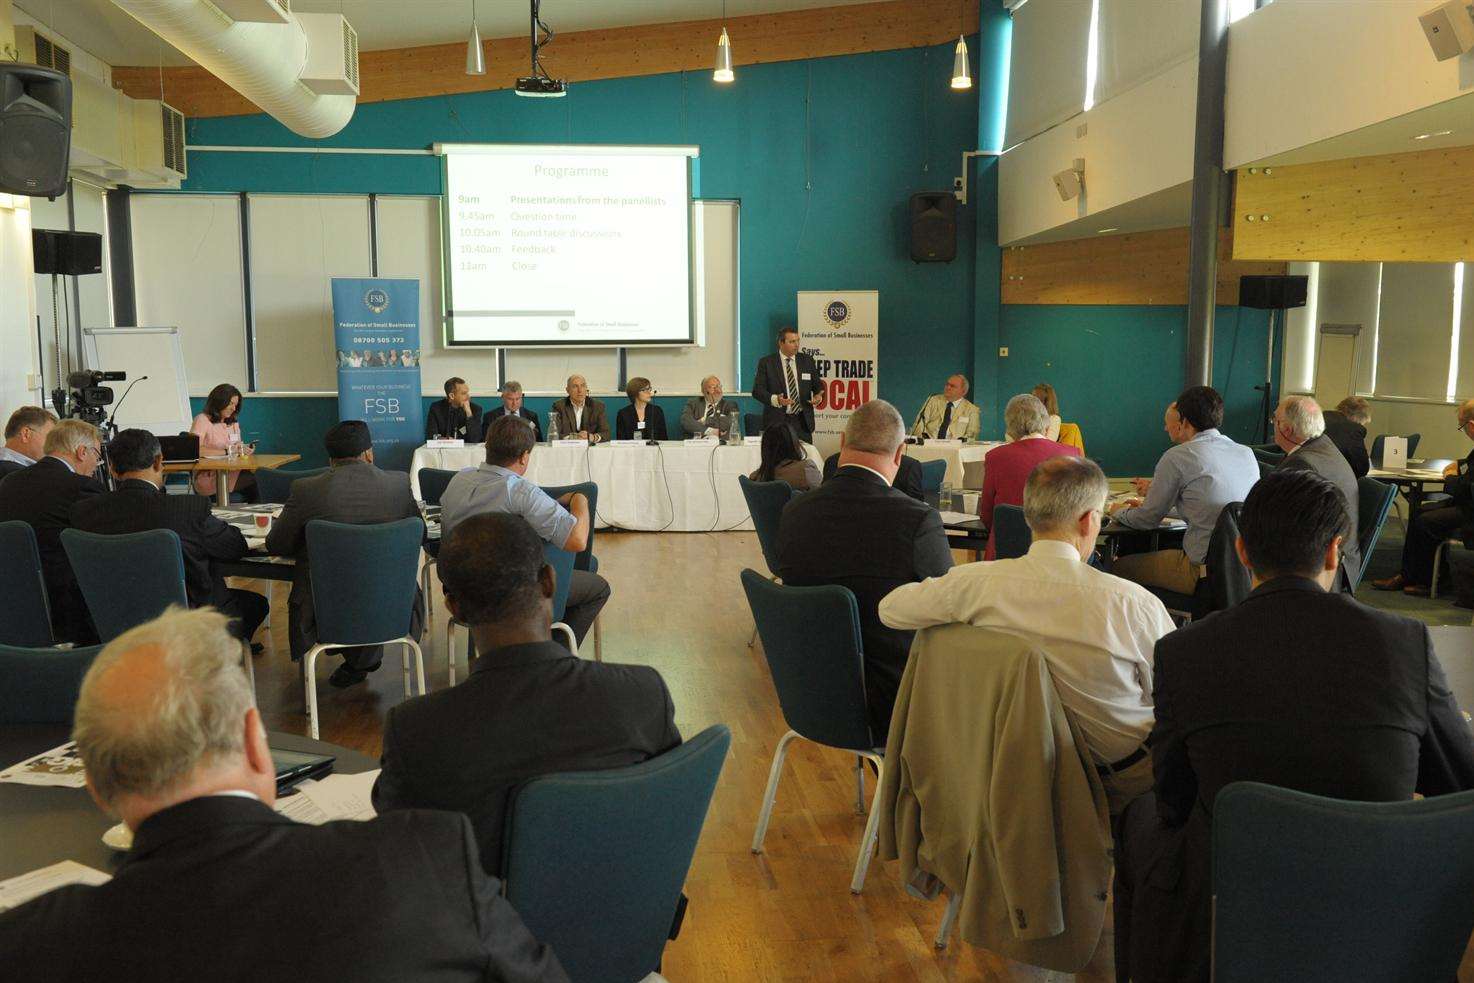 Dozens of small business leaders gathered to hear what the experts had to say about an Ebbsfleet garden city